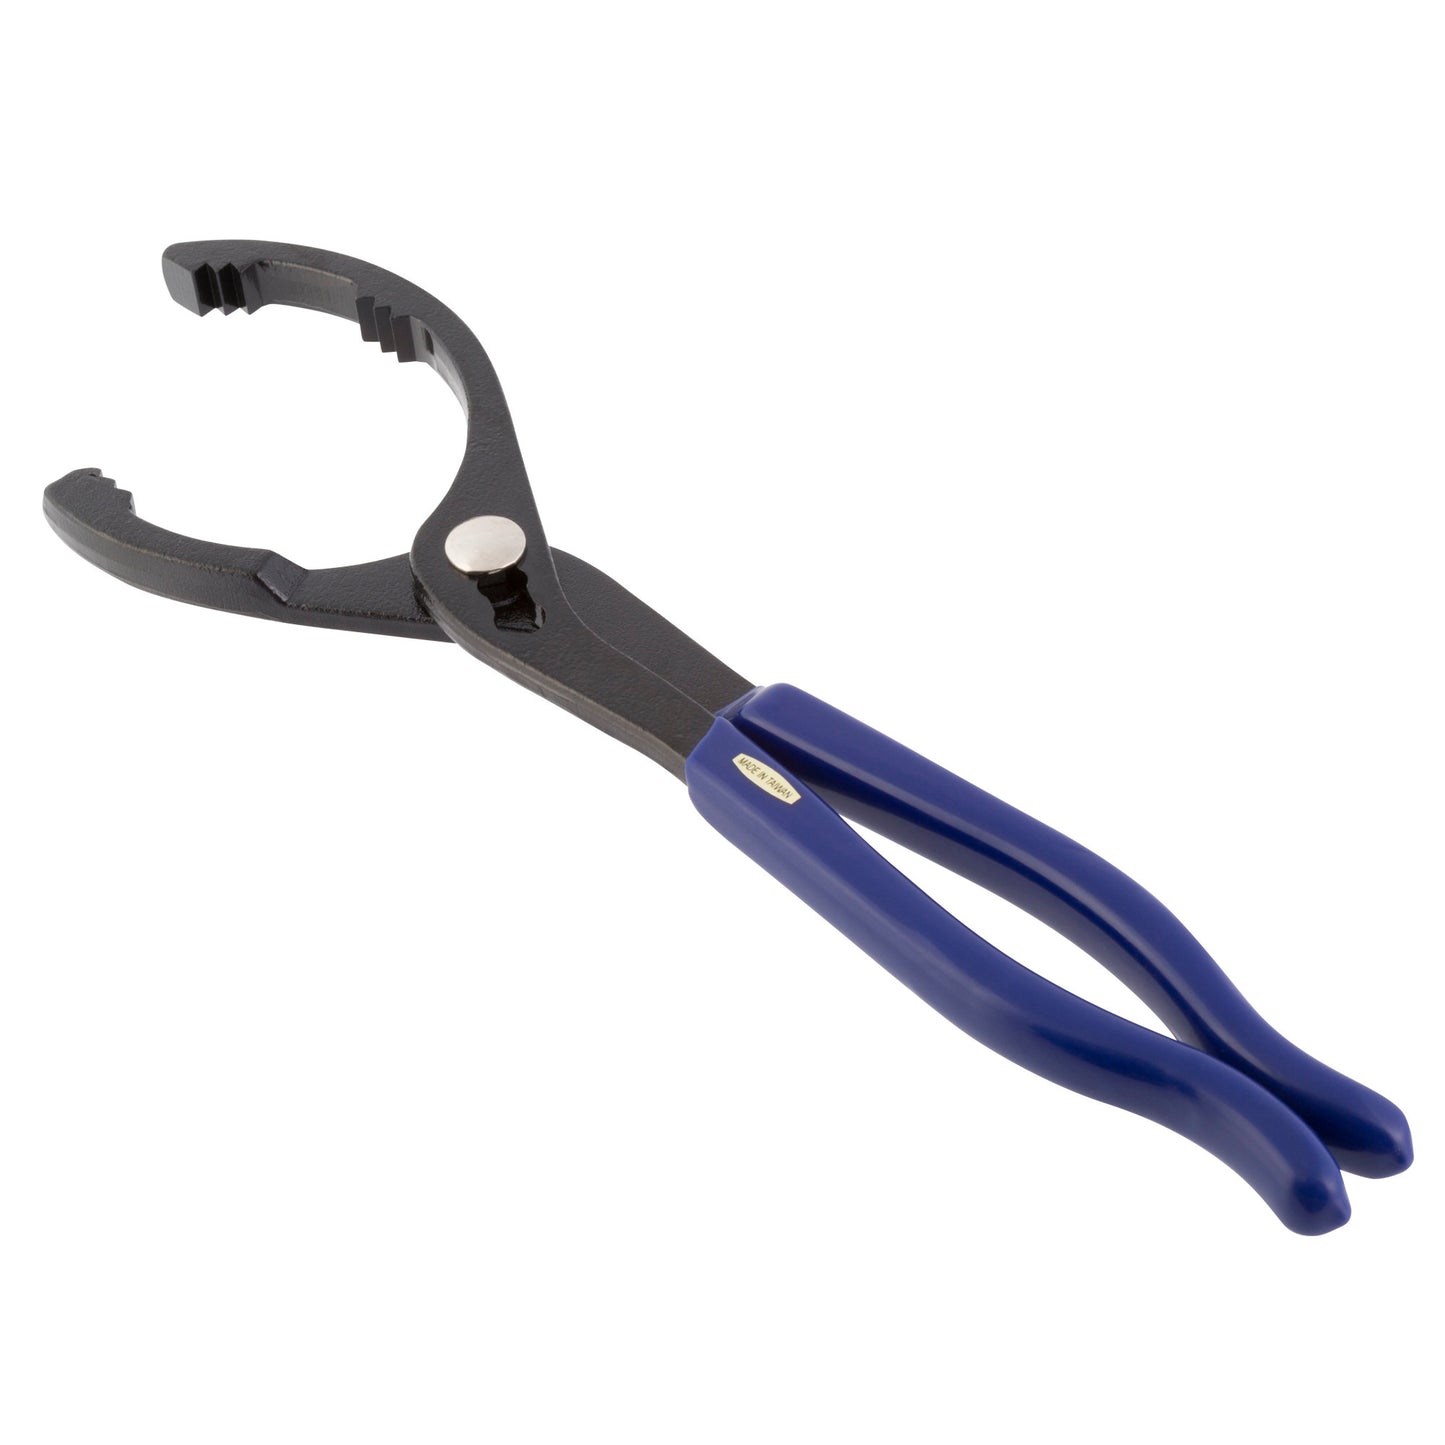 12-inch Large Oil Filter Pliers